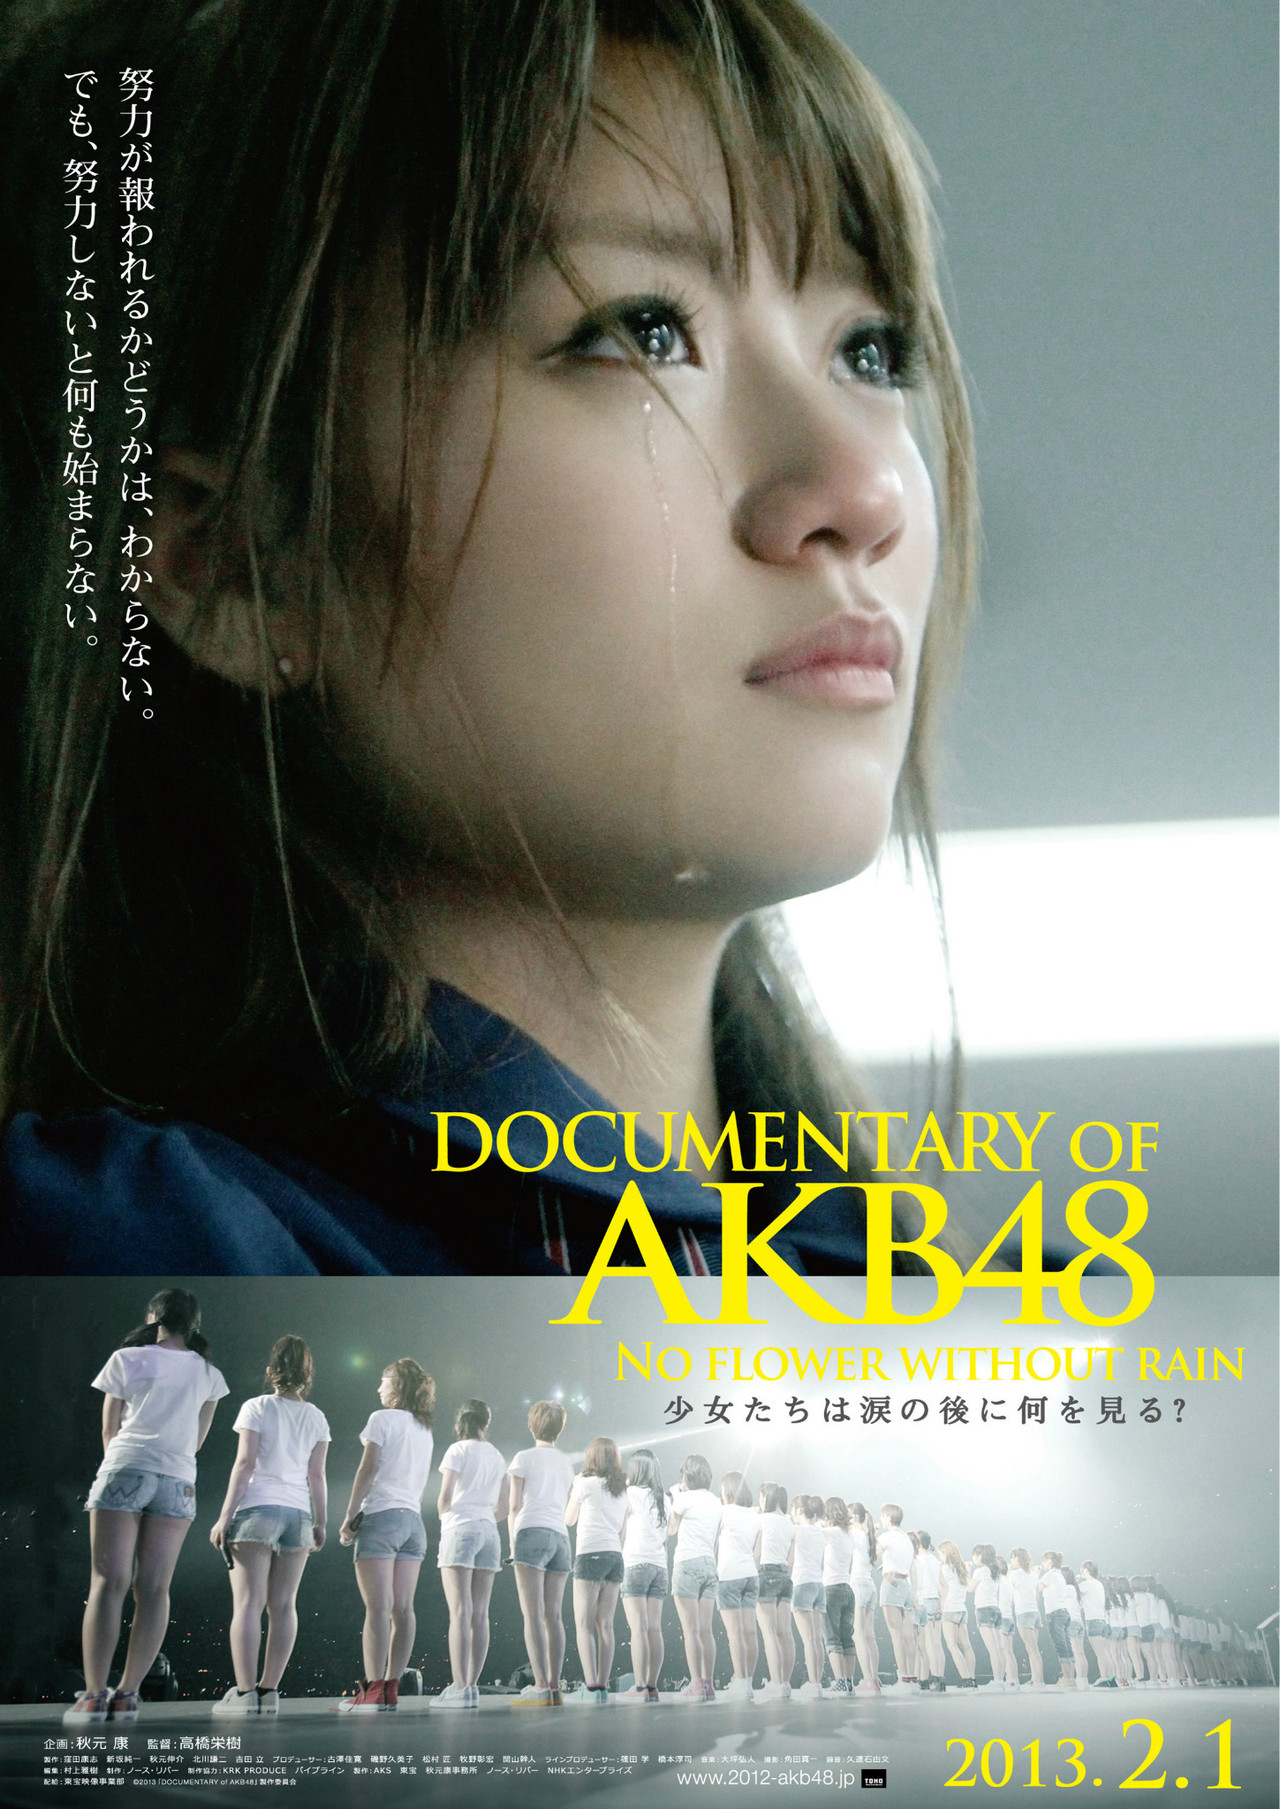 [Movie Trailer #1] DOCUMENTARY OF AKB48 NO FLOWER WITHOUT RAIN/AKB48